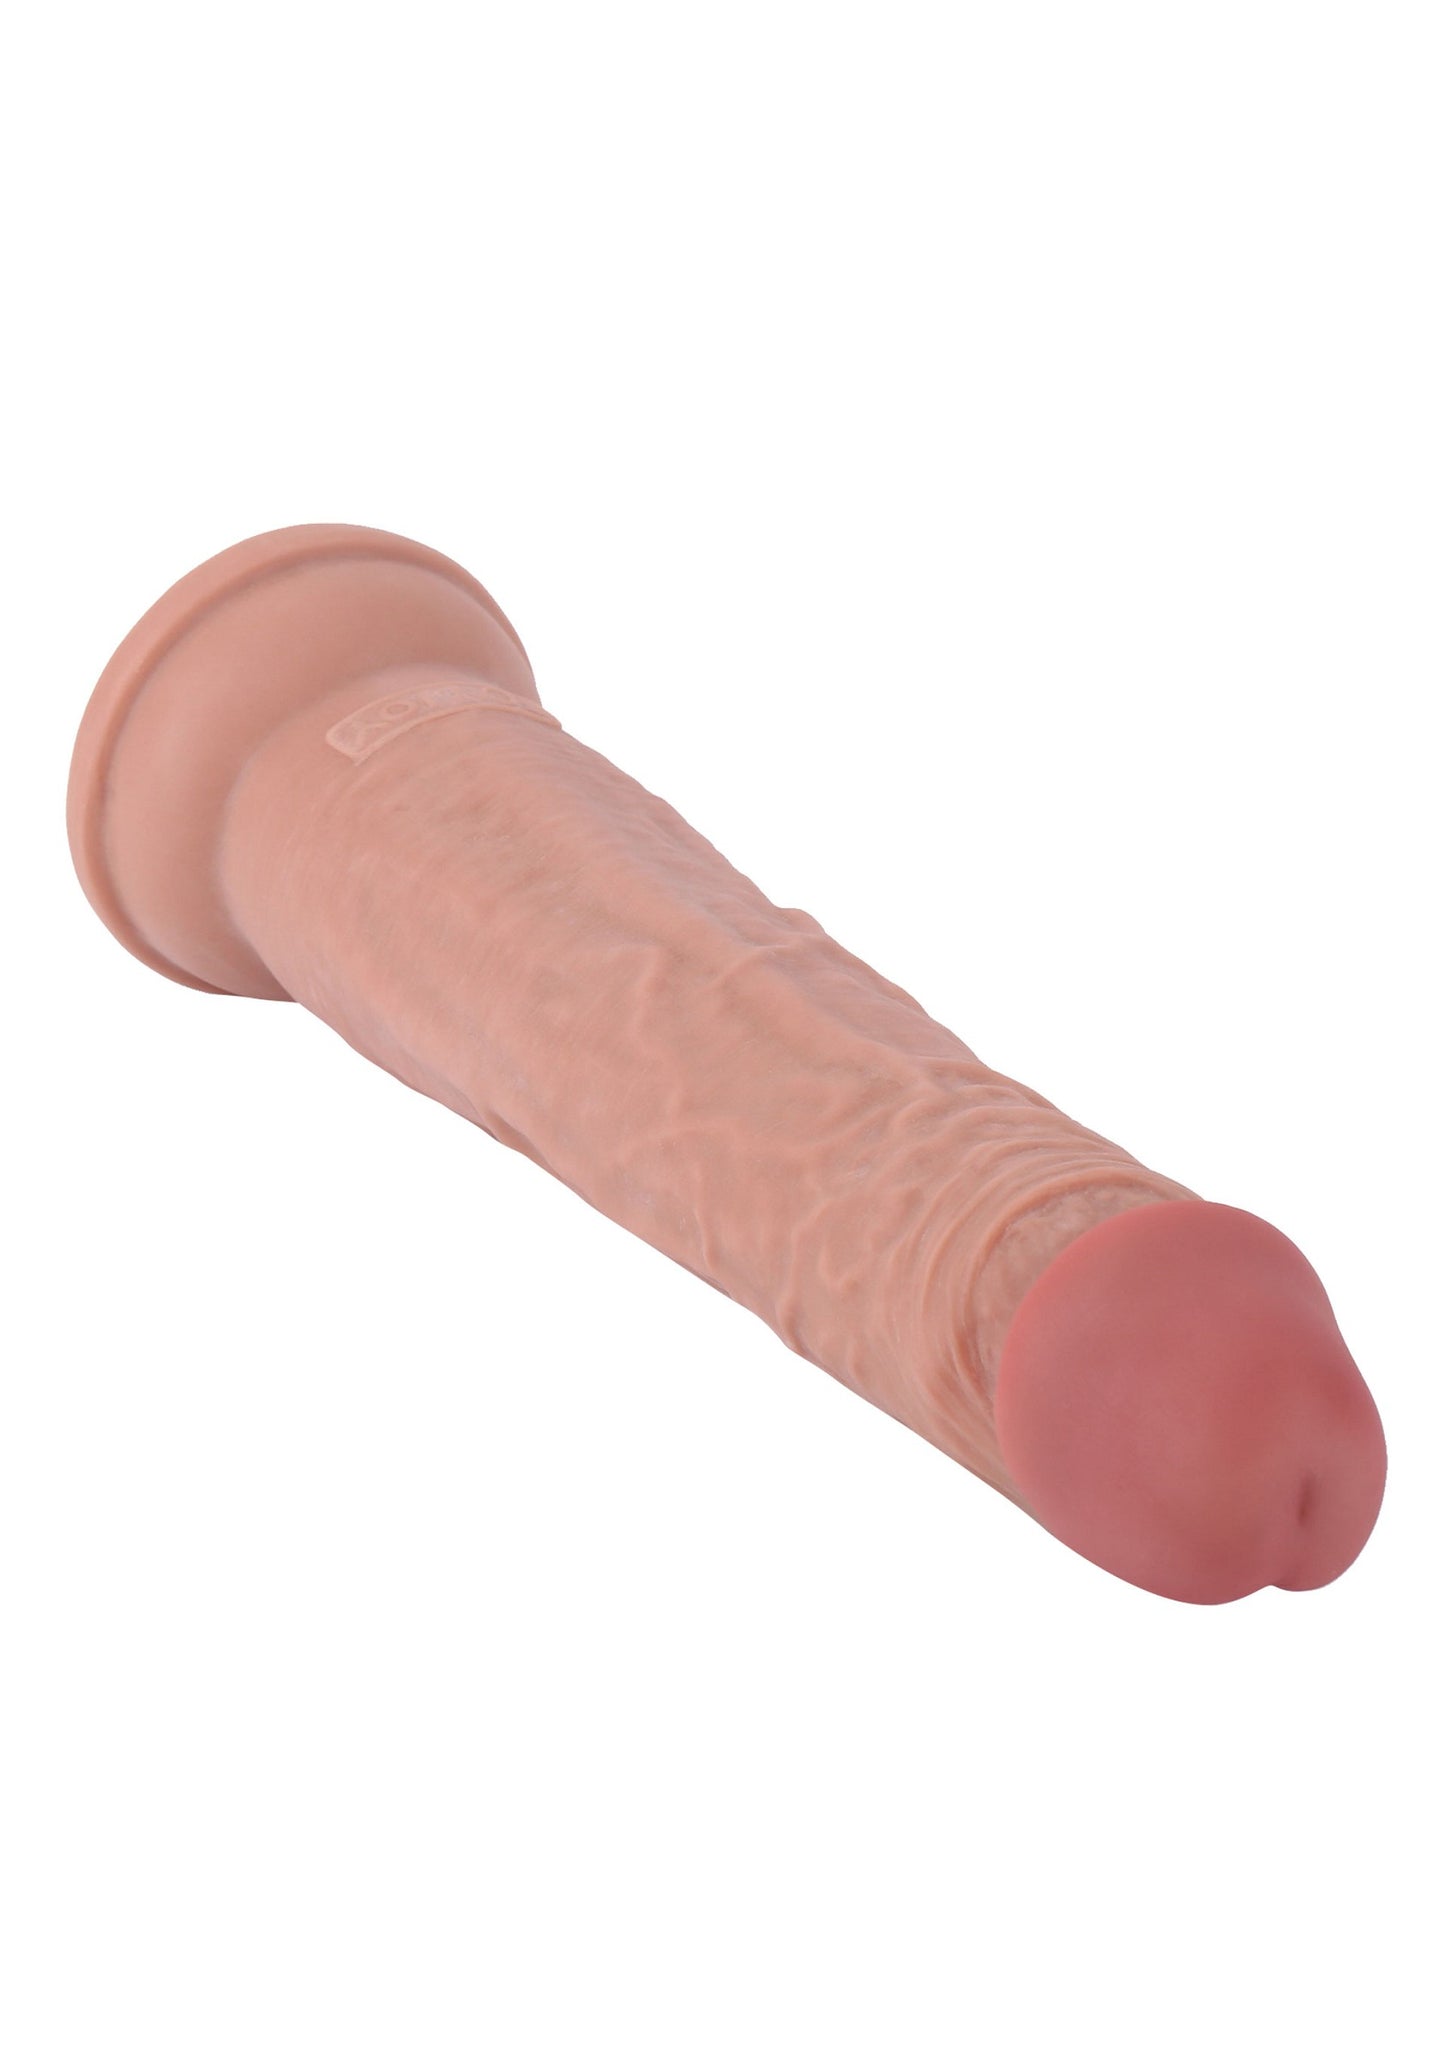 ToyJoy Get Real Deluxe Dual Density Dong 14' SKIN - 6